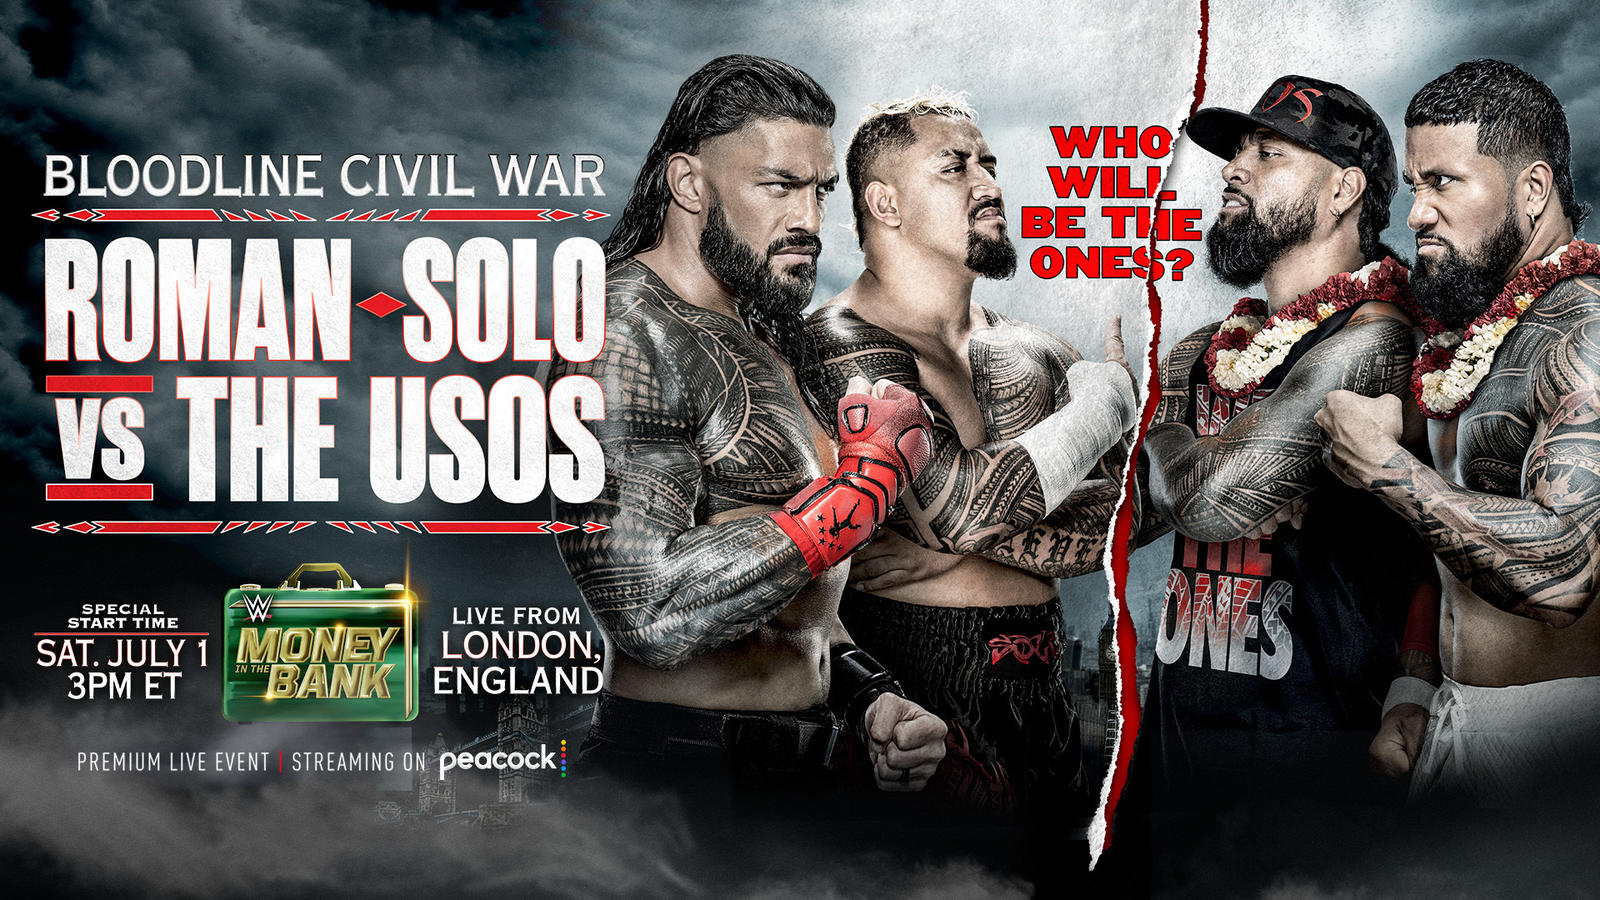 The Bloodline Civil War is the highlight for this week's Pro Wrestling Scheule